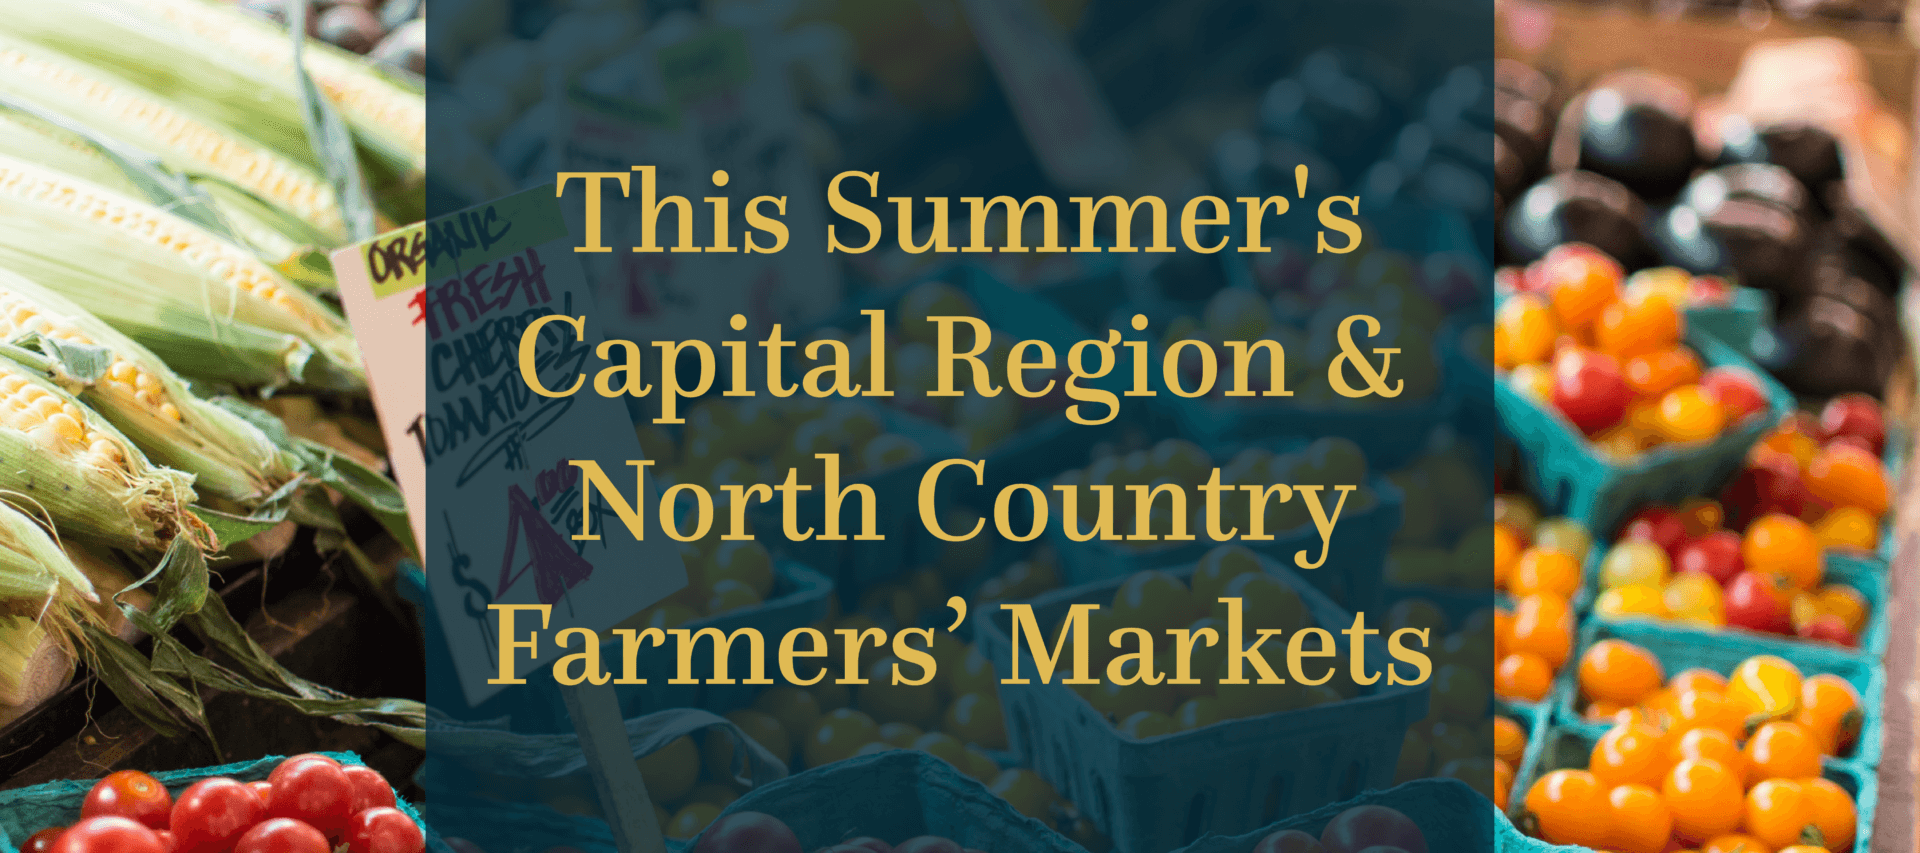 This Summer's Capital Region and North Country Farmer's Markets